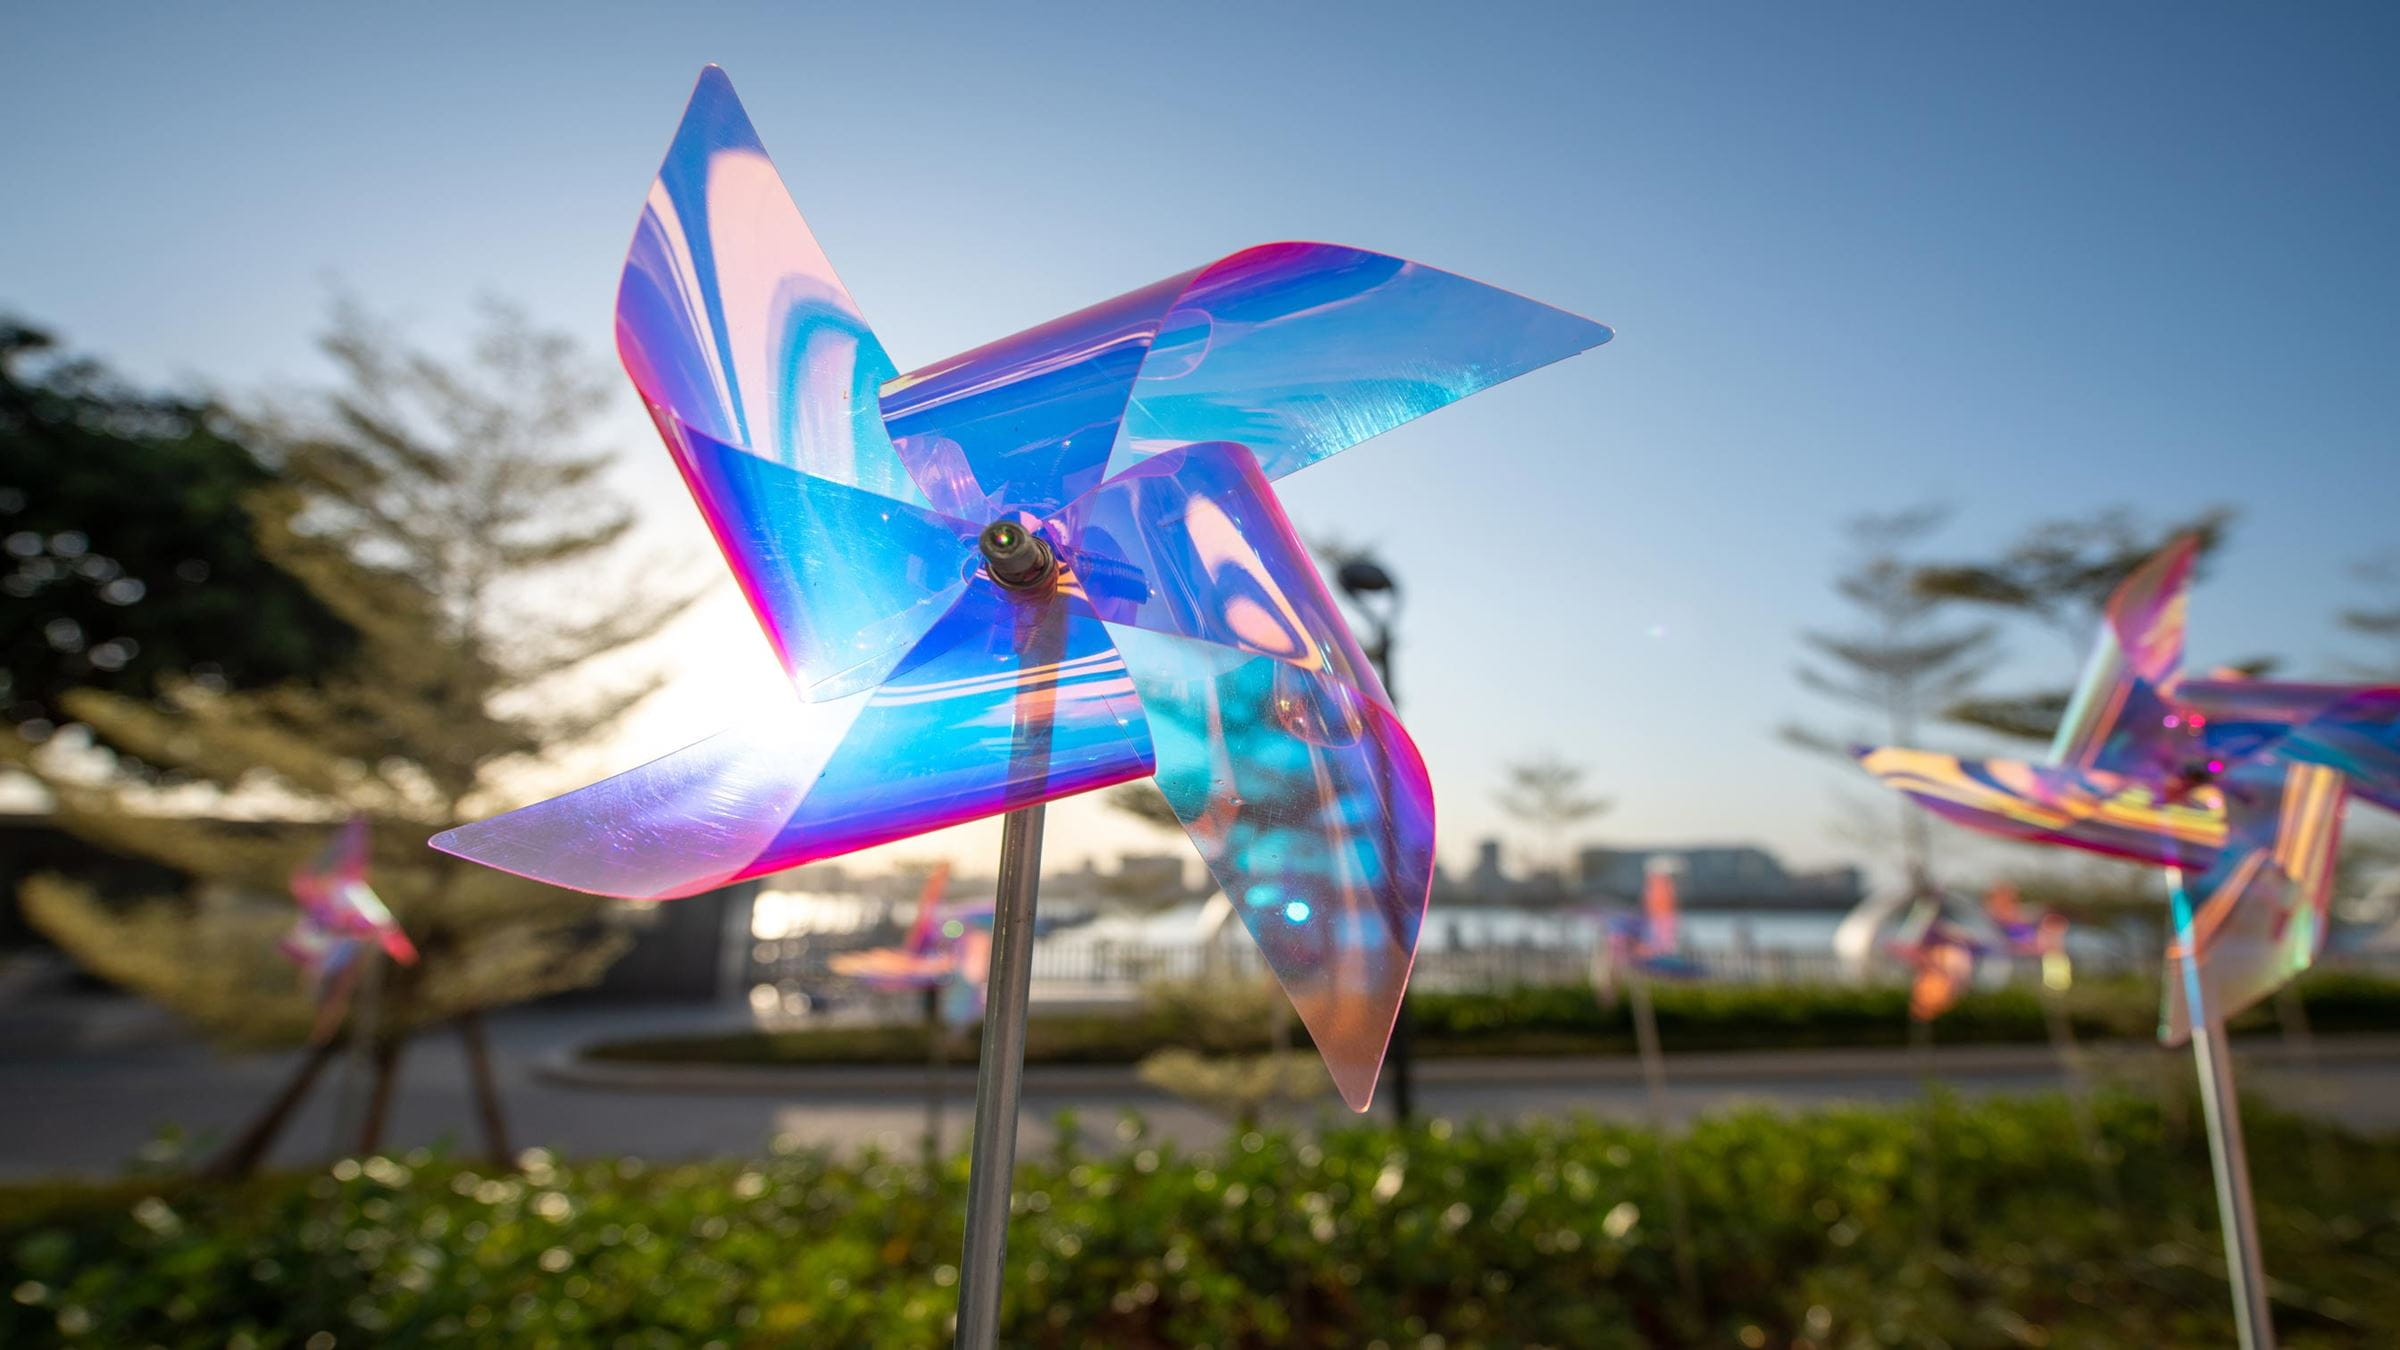 Plastic toy windmill in front of sun and sun light shining through the near transparent windmill